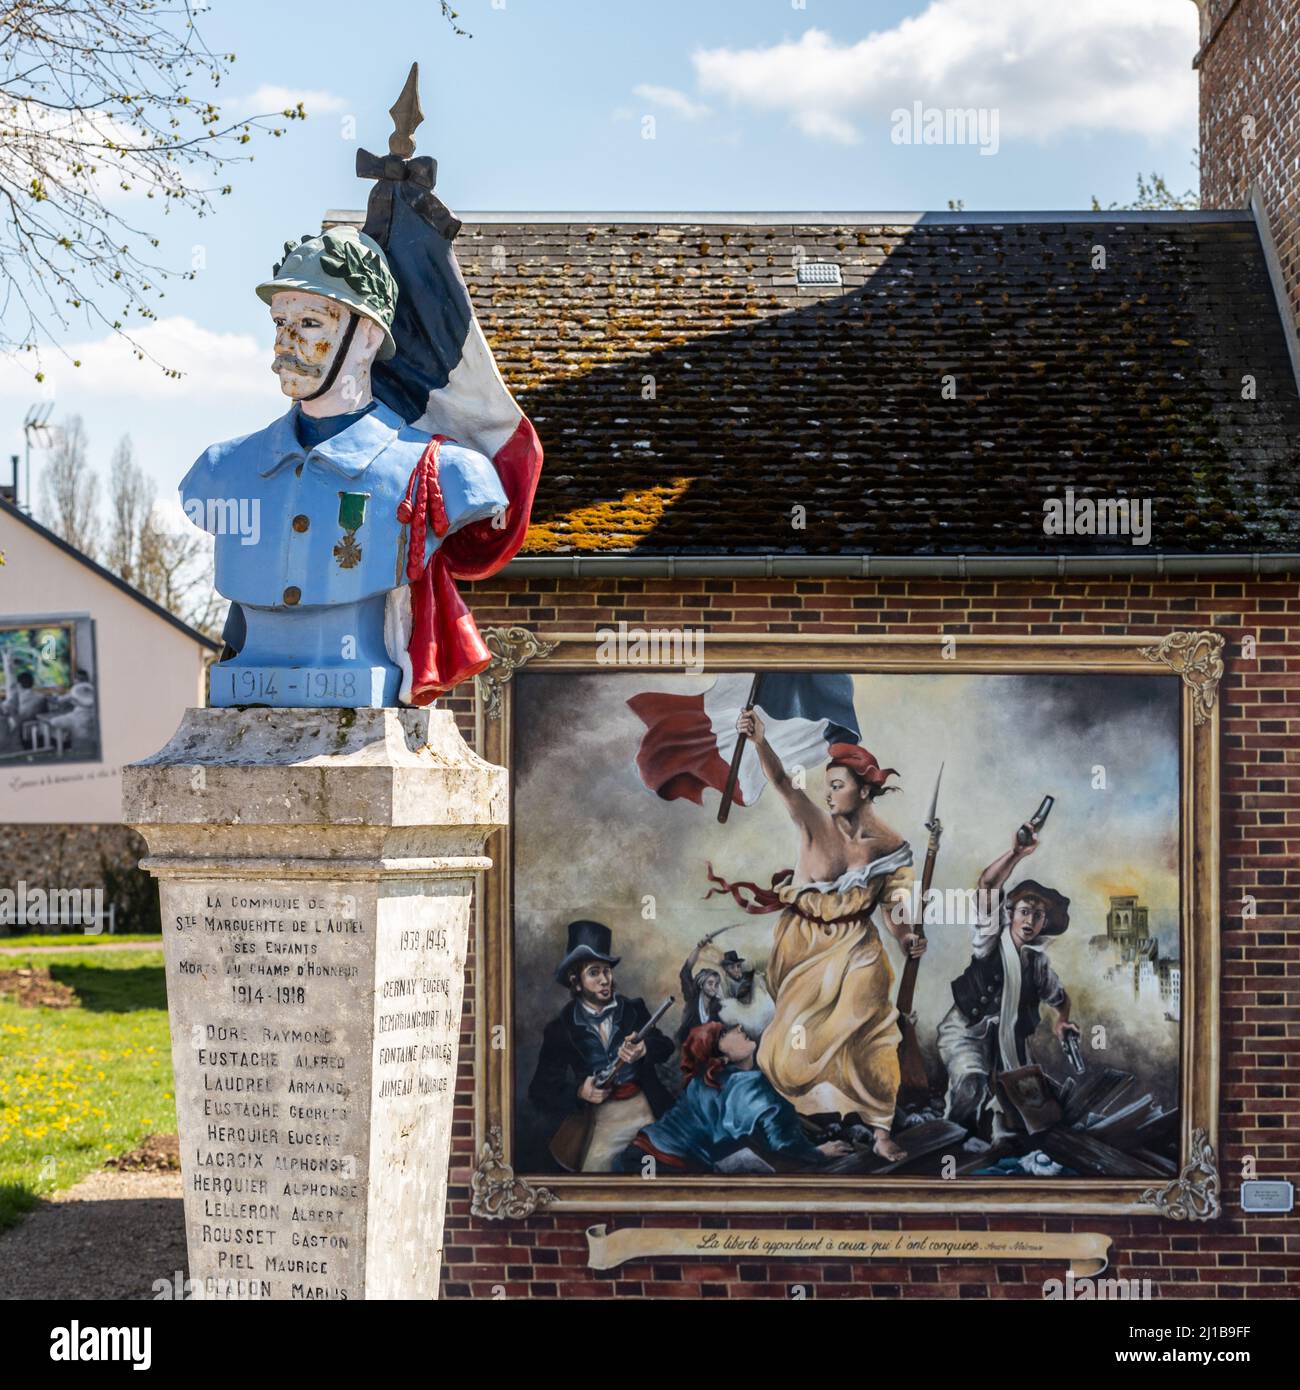 WAR DEAD MONUMENT WITH THE FRENCH FLAG IN HOMAGE TO SOLDIERS OF THE FIRST WORLD WAR AND REPRESENTATION OF A PAINTING EVOKING LIBERTY GUIDING THE PEOPLE AND VALUES OF THE REPUBLIC, SAINTE-MARGUERITE-DE-LÕAUTEL, EURE, FRANCE Stock Photo